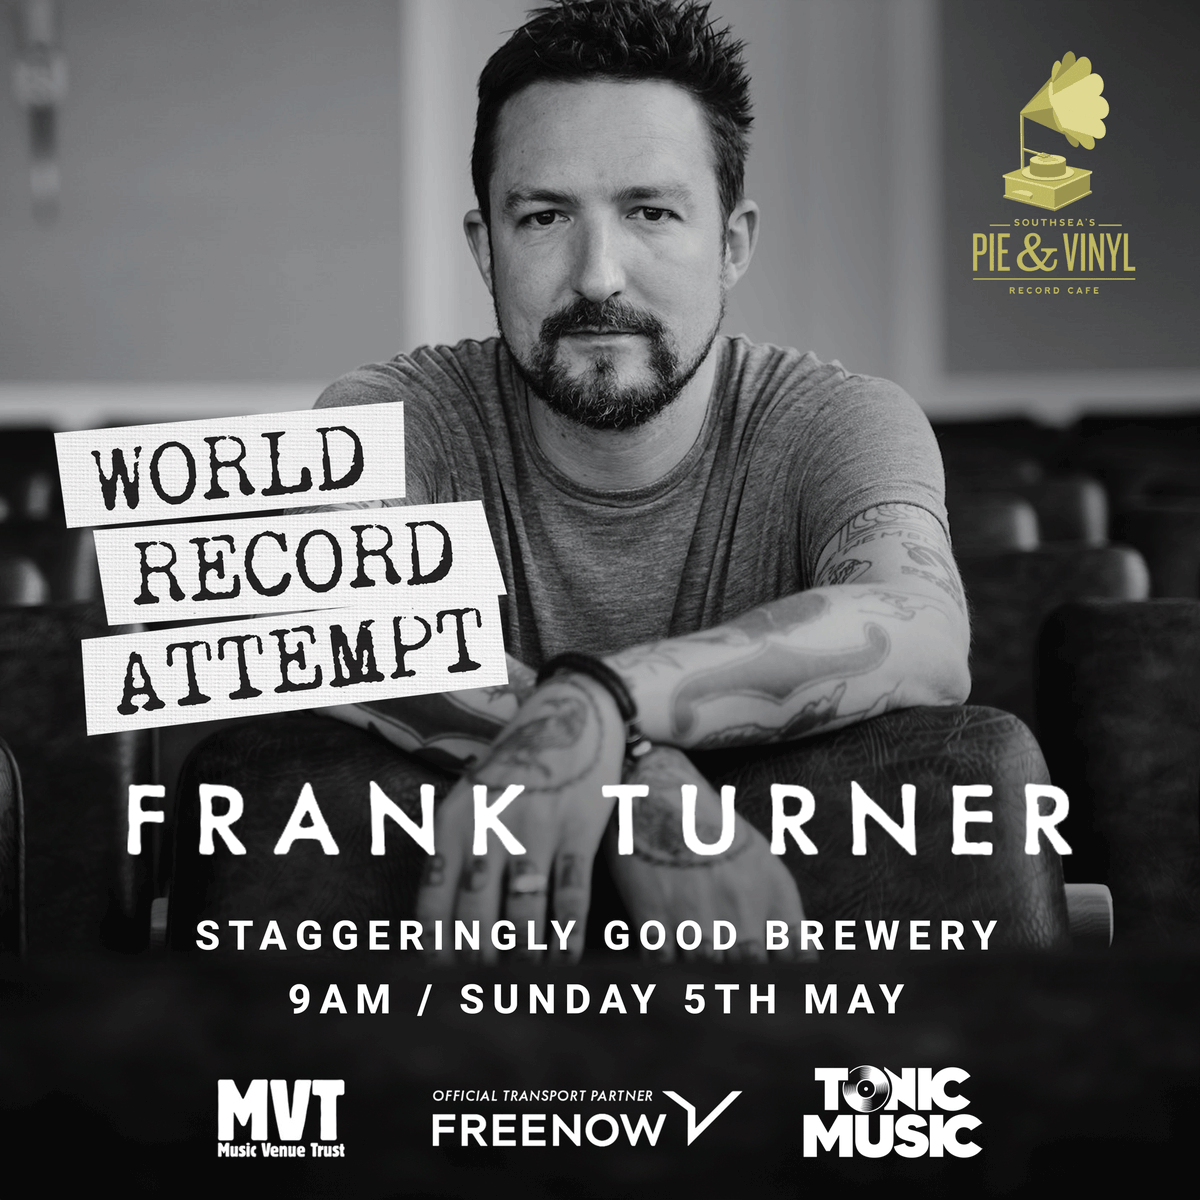 Early start this morning!
Come and say hi if you are heading to the World Record attempt by @FrankTurner to play the most number of shows in different cities in a 24 hour period with @StaggeringBeer and Southsea's Pie & Vinyl.
#MentalHealth #Tonic #Music #Wellbeing